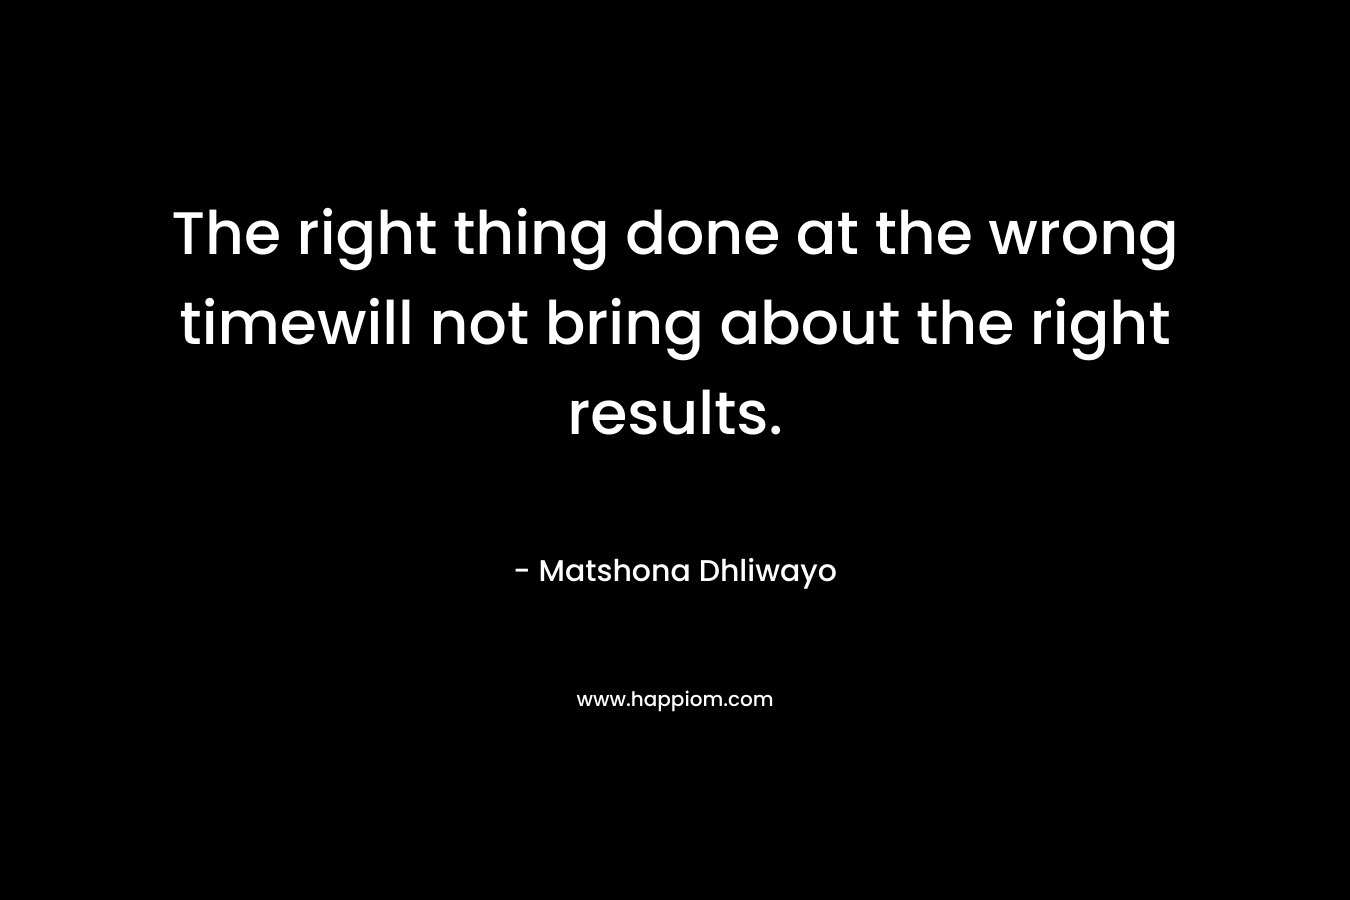 The right thing done at the wrong timewill not bring about the right results.